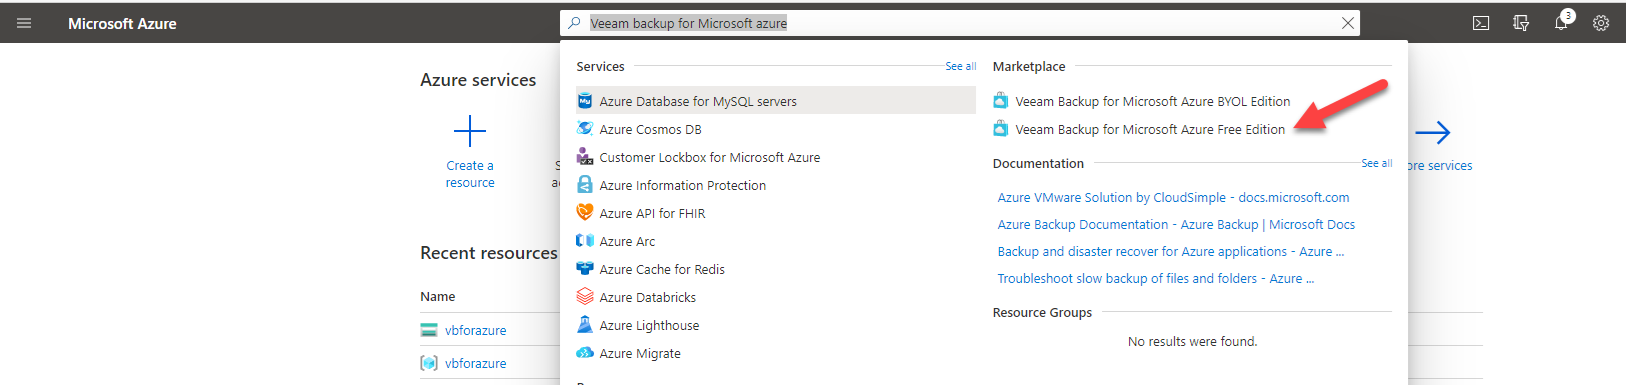 102020 1922 HowtoInstal15 - How to Install Veeam Backup for Microsoft Azure 1.0